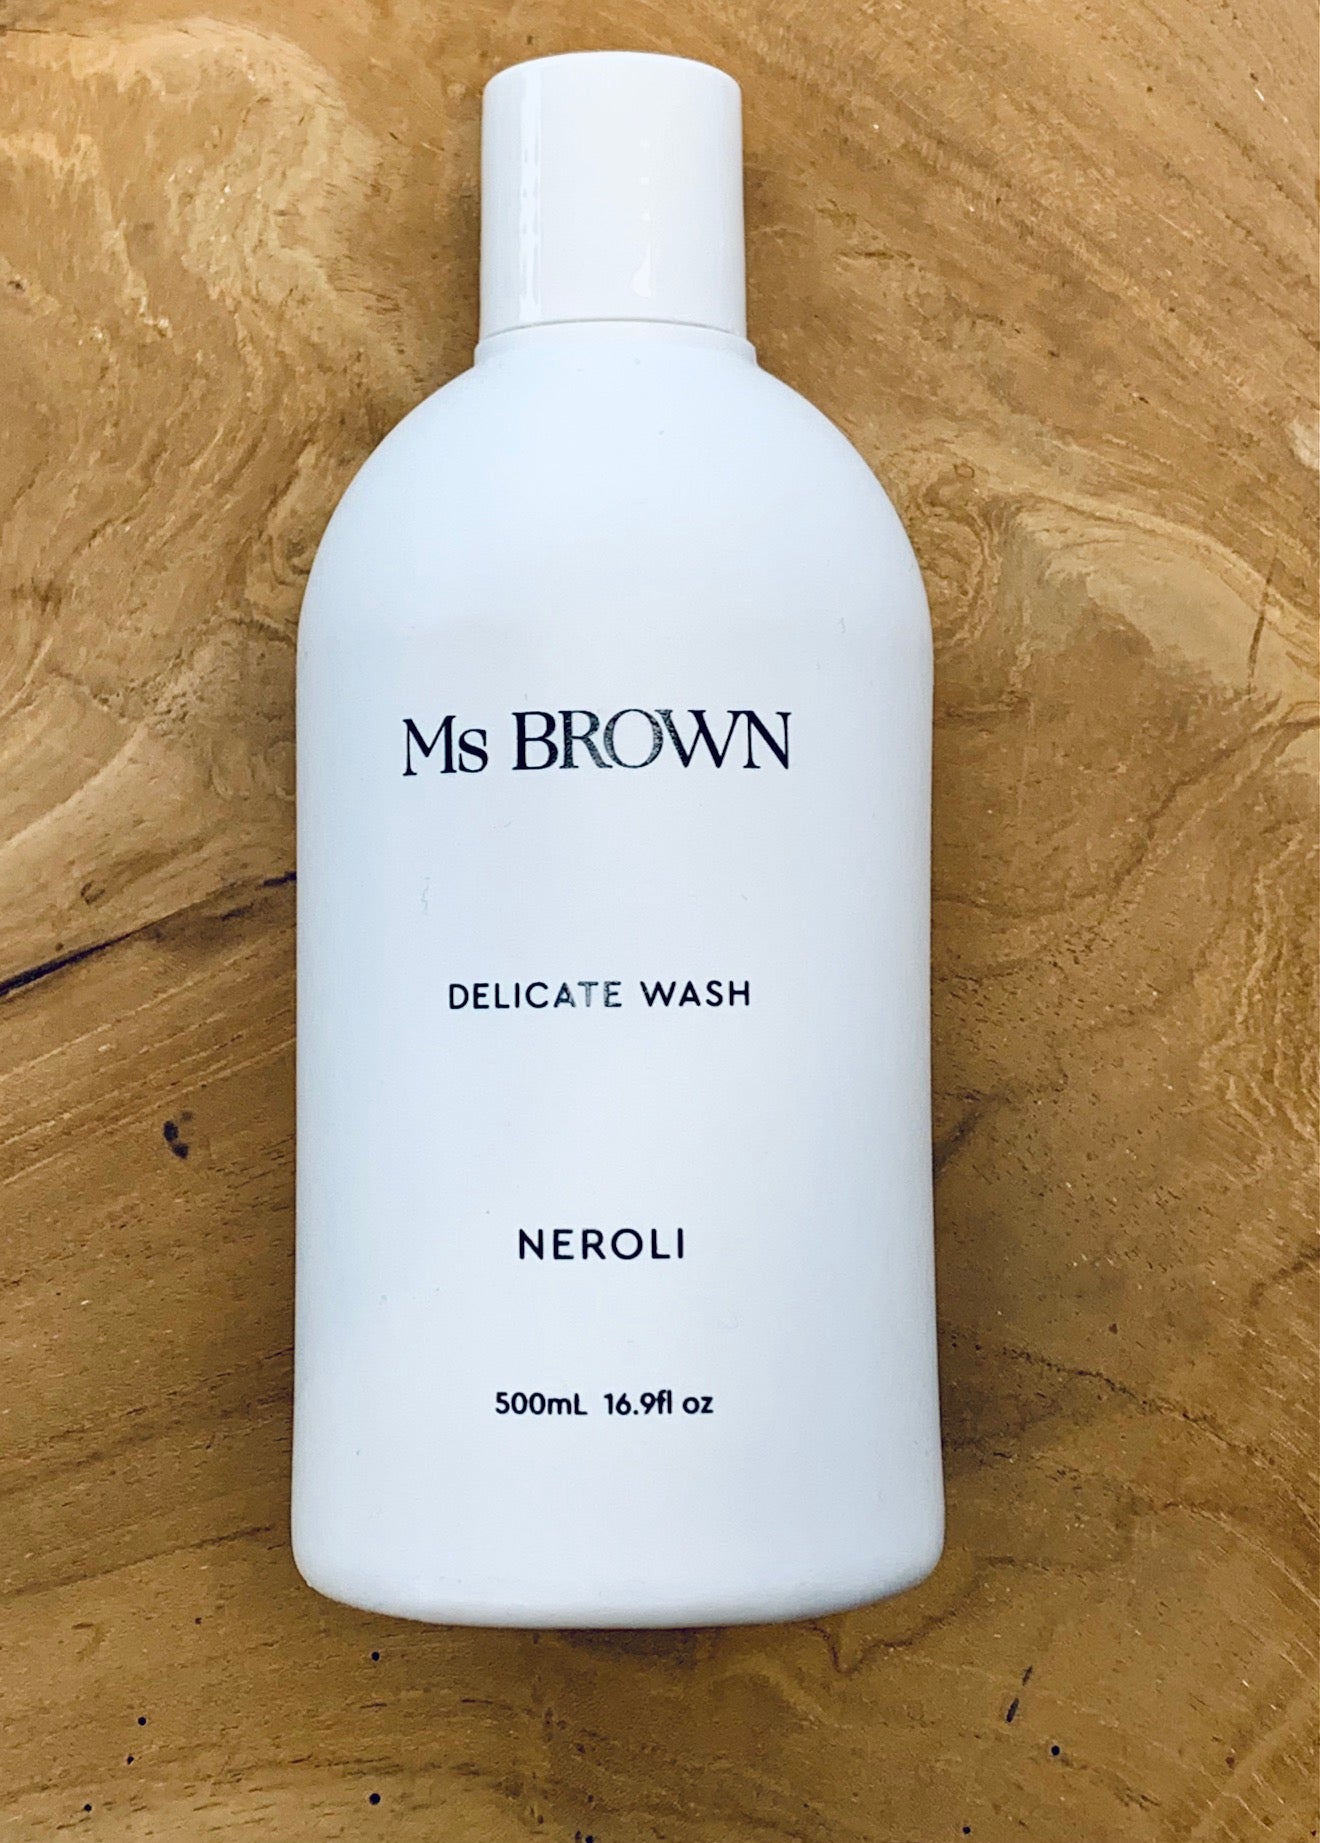 Ms BROWN Delicate Wash